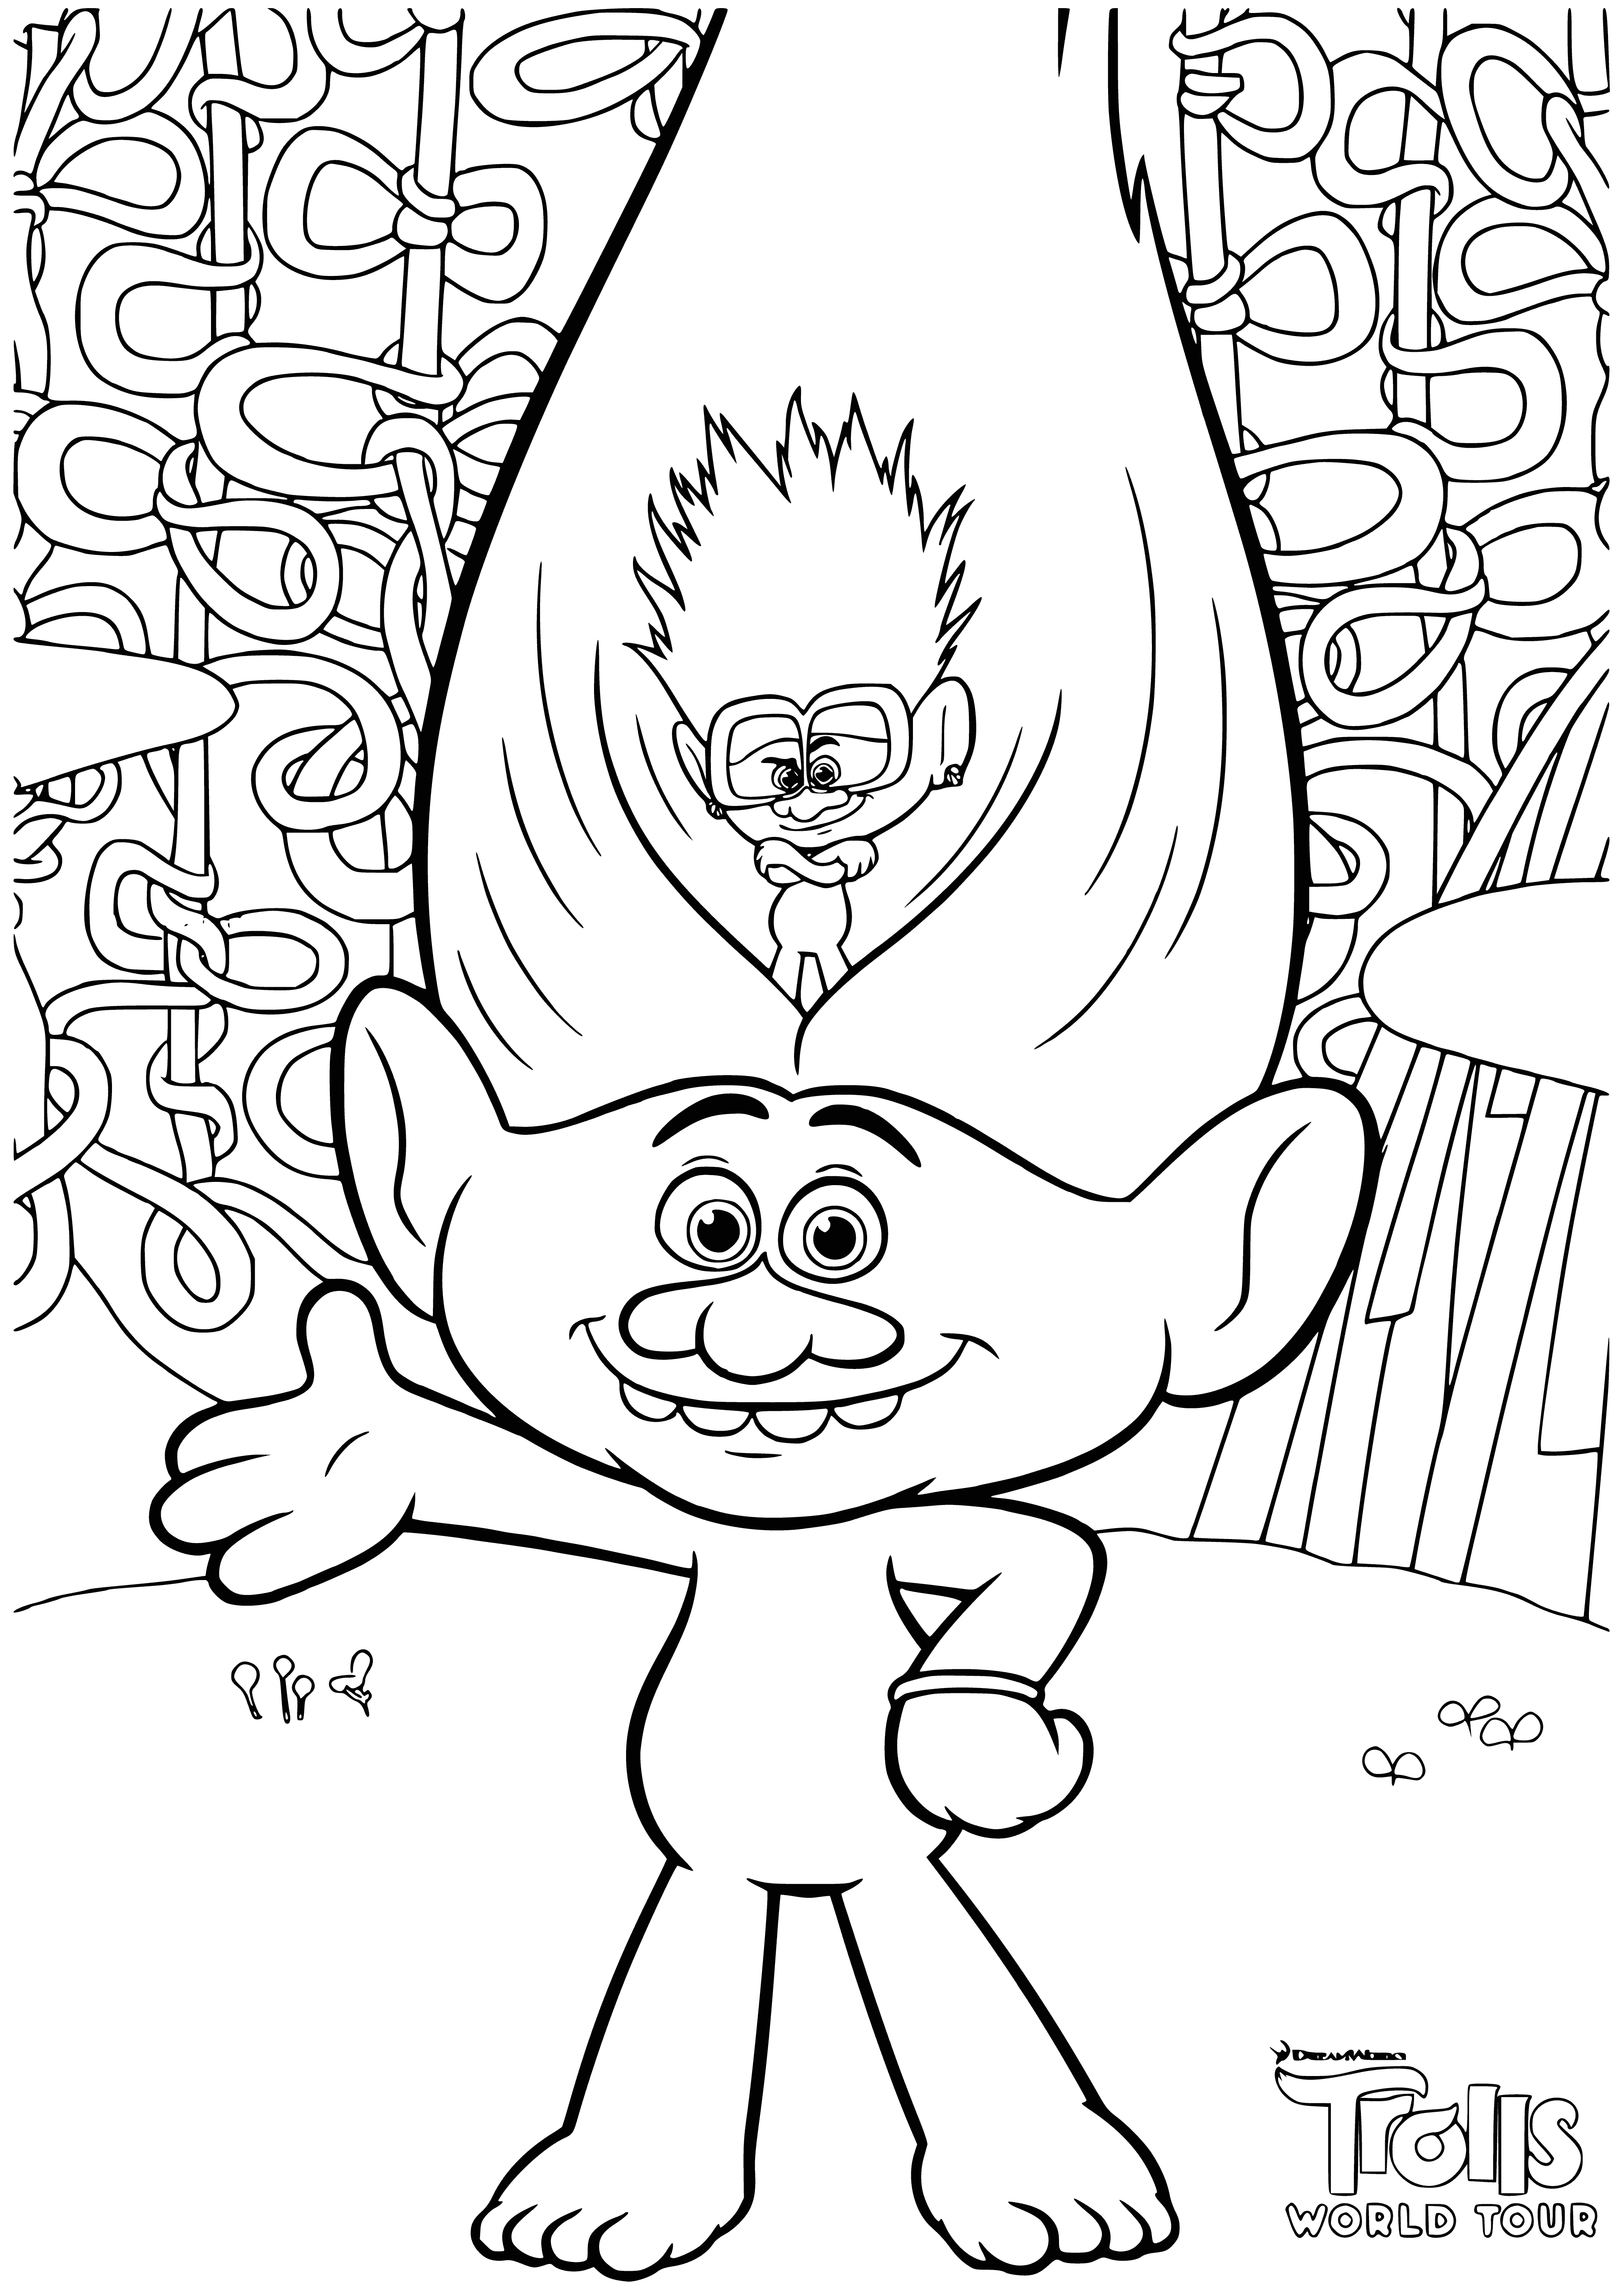 Trolls 2 coloring page